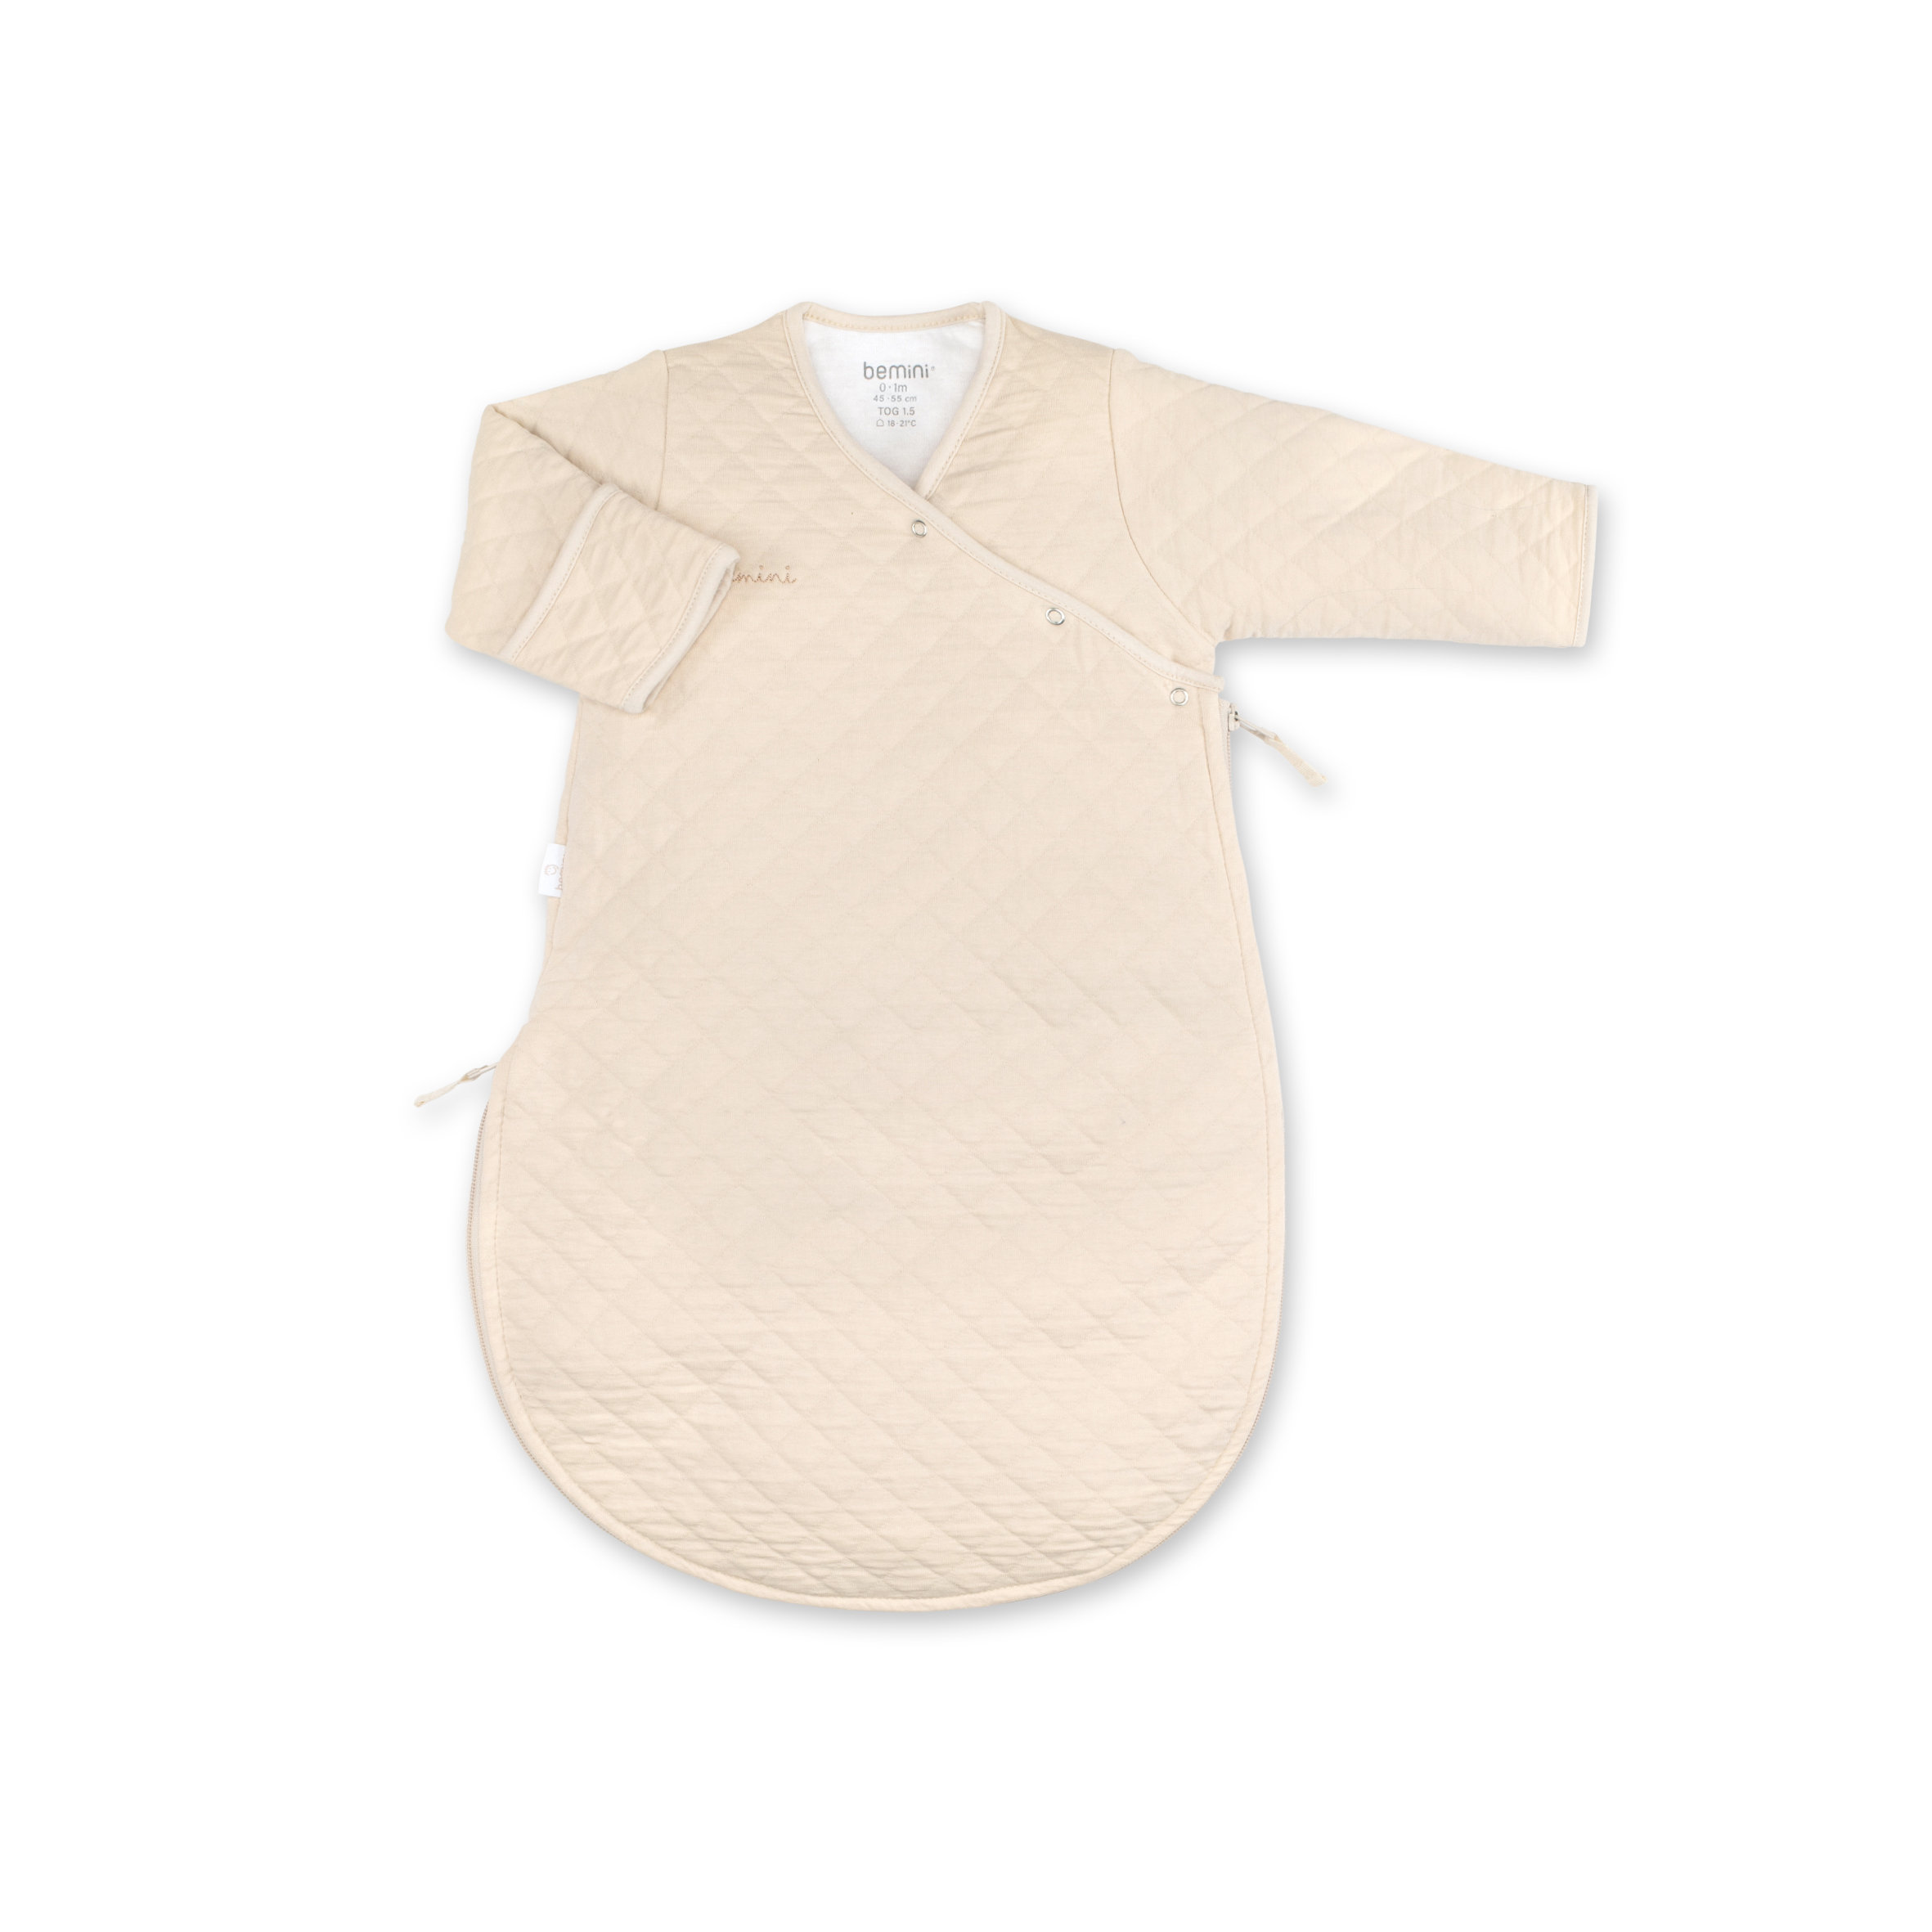 MAGIC BAG Pady quilted jersey 0-1m QUILT Cream tog 1.5